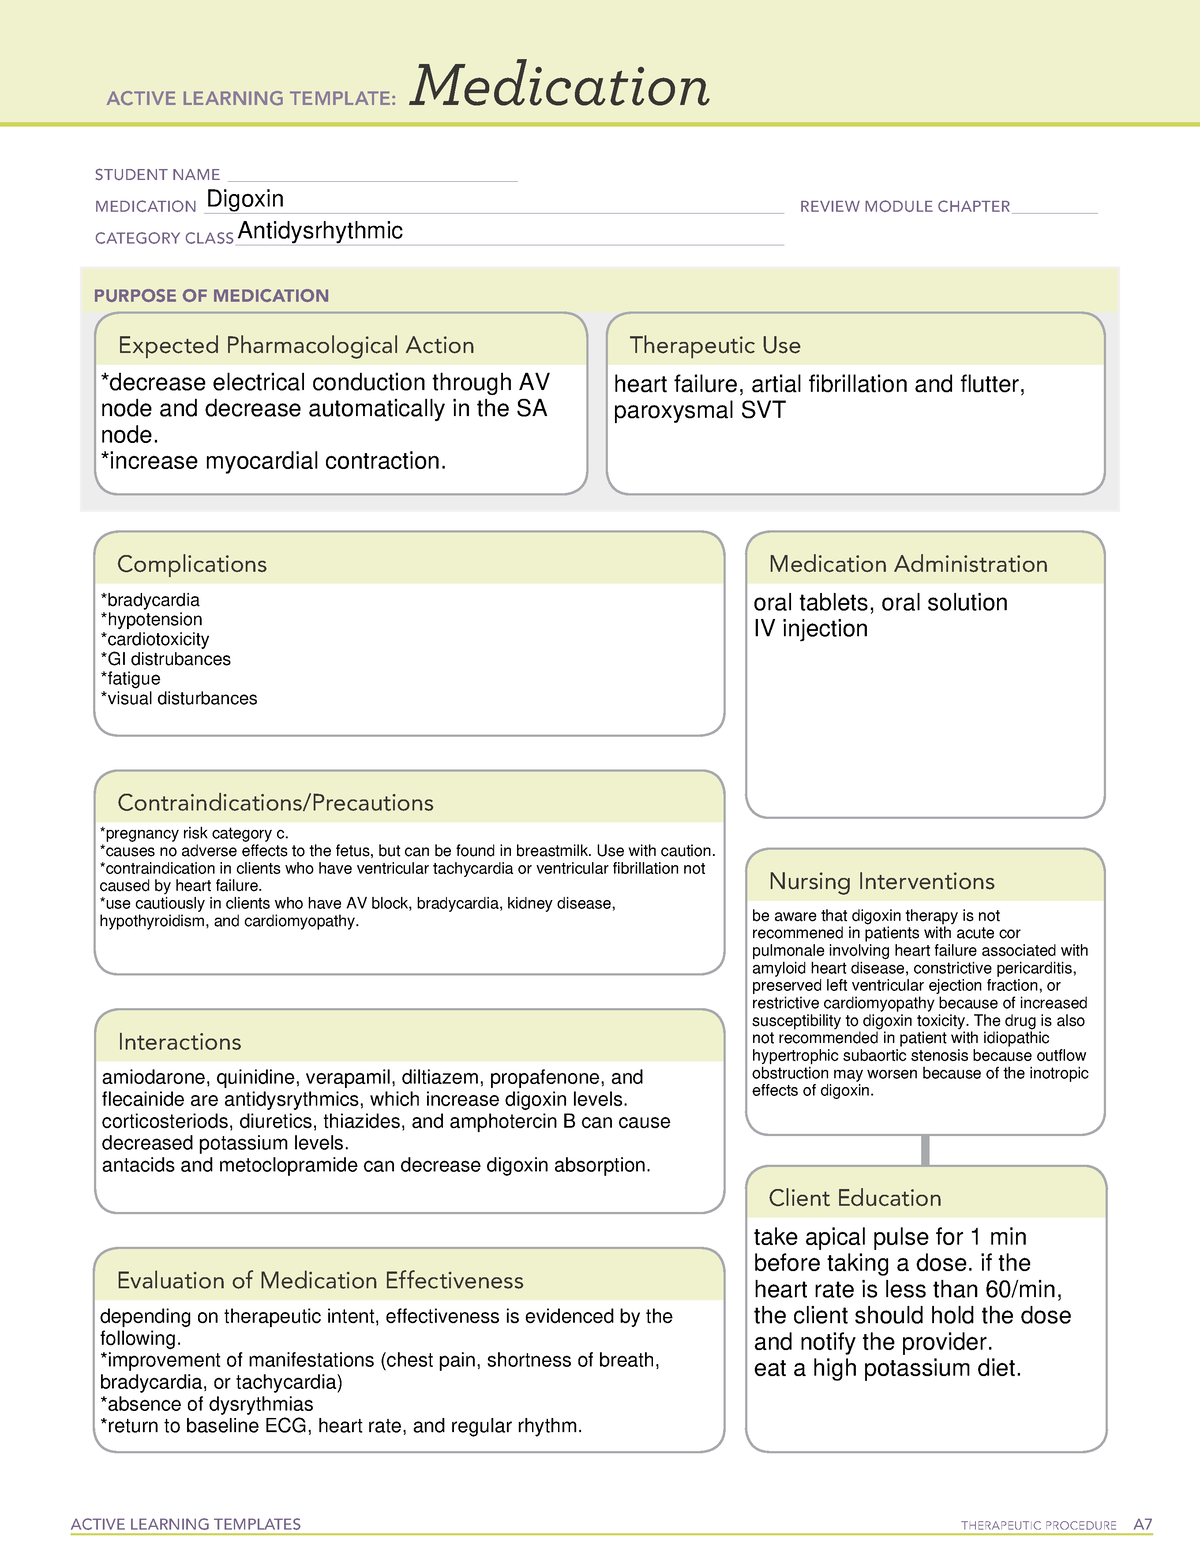 ati-medication-digoxin-focus-review-9-active-learning-templates-therapeutic-procedure-a